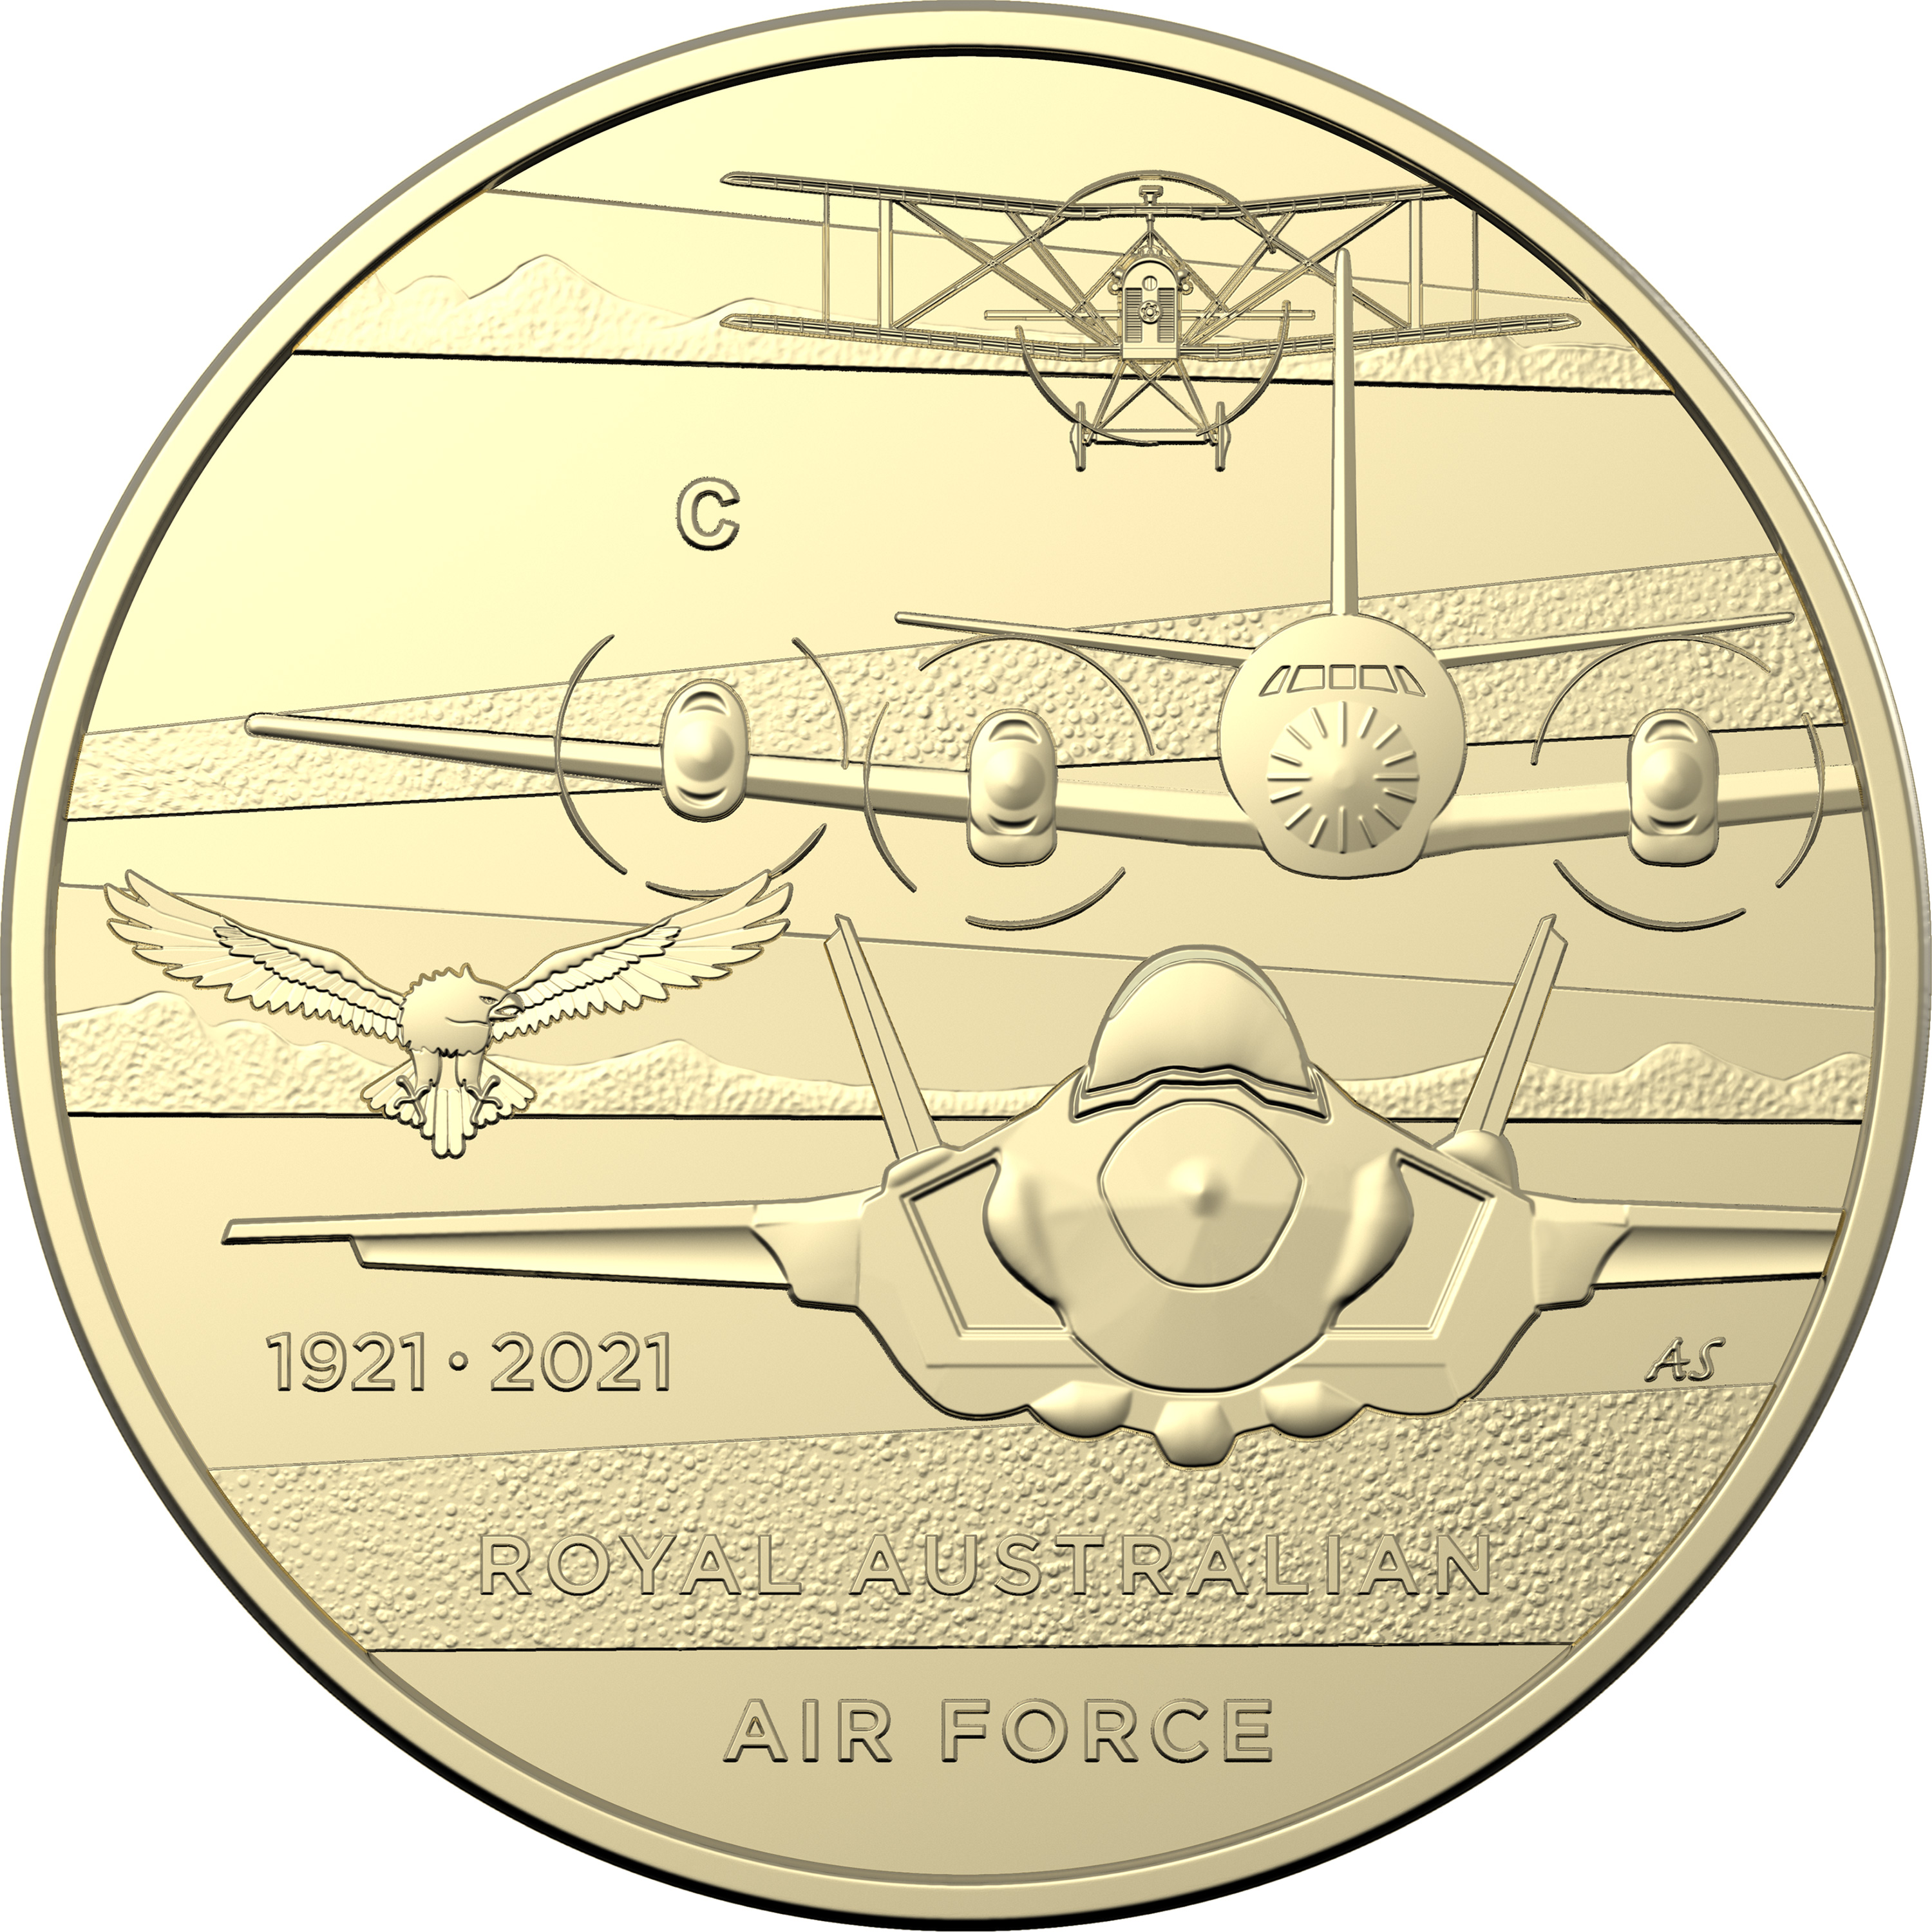 Air Force mints a flying start to 2021 with first coins